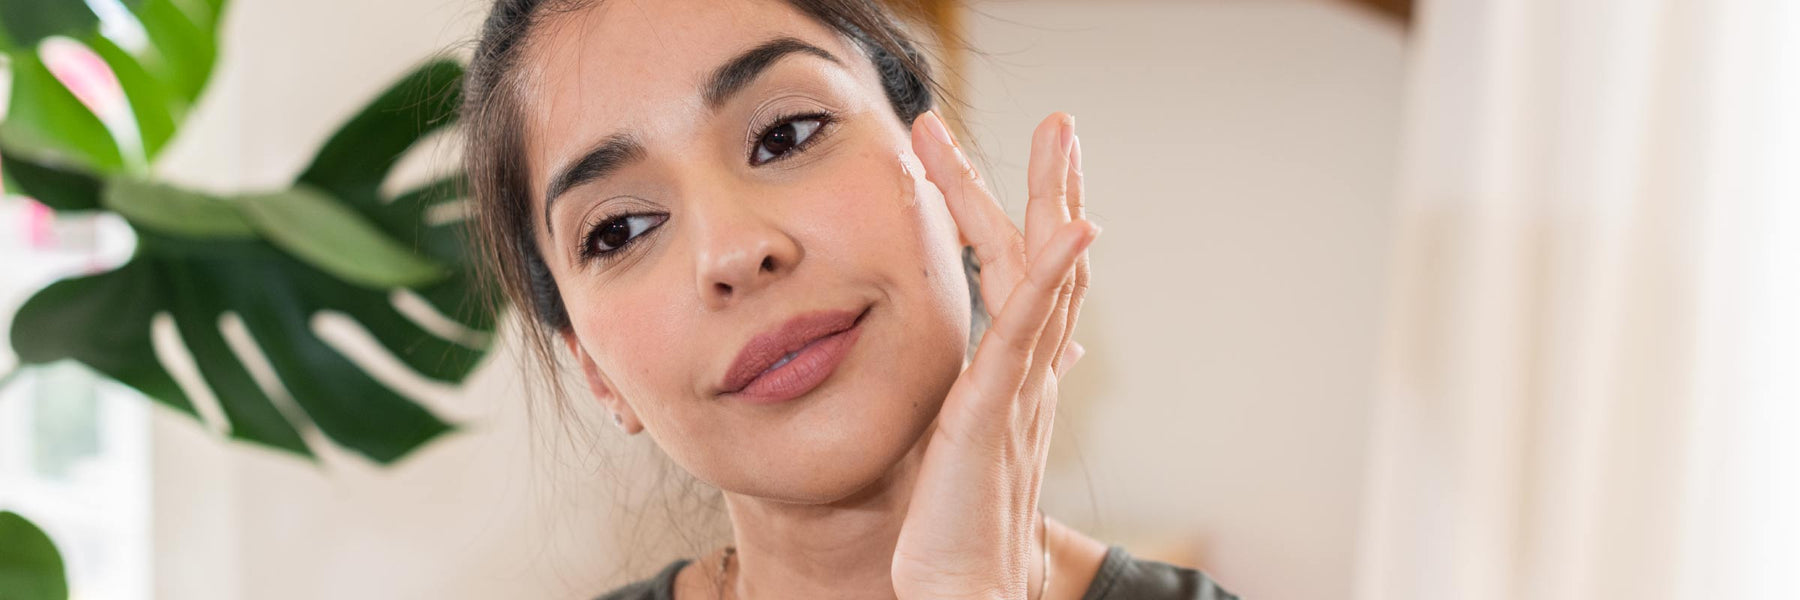 Skin Type vs. Skin Condition: What's the Difference